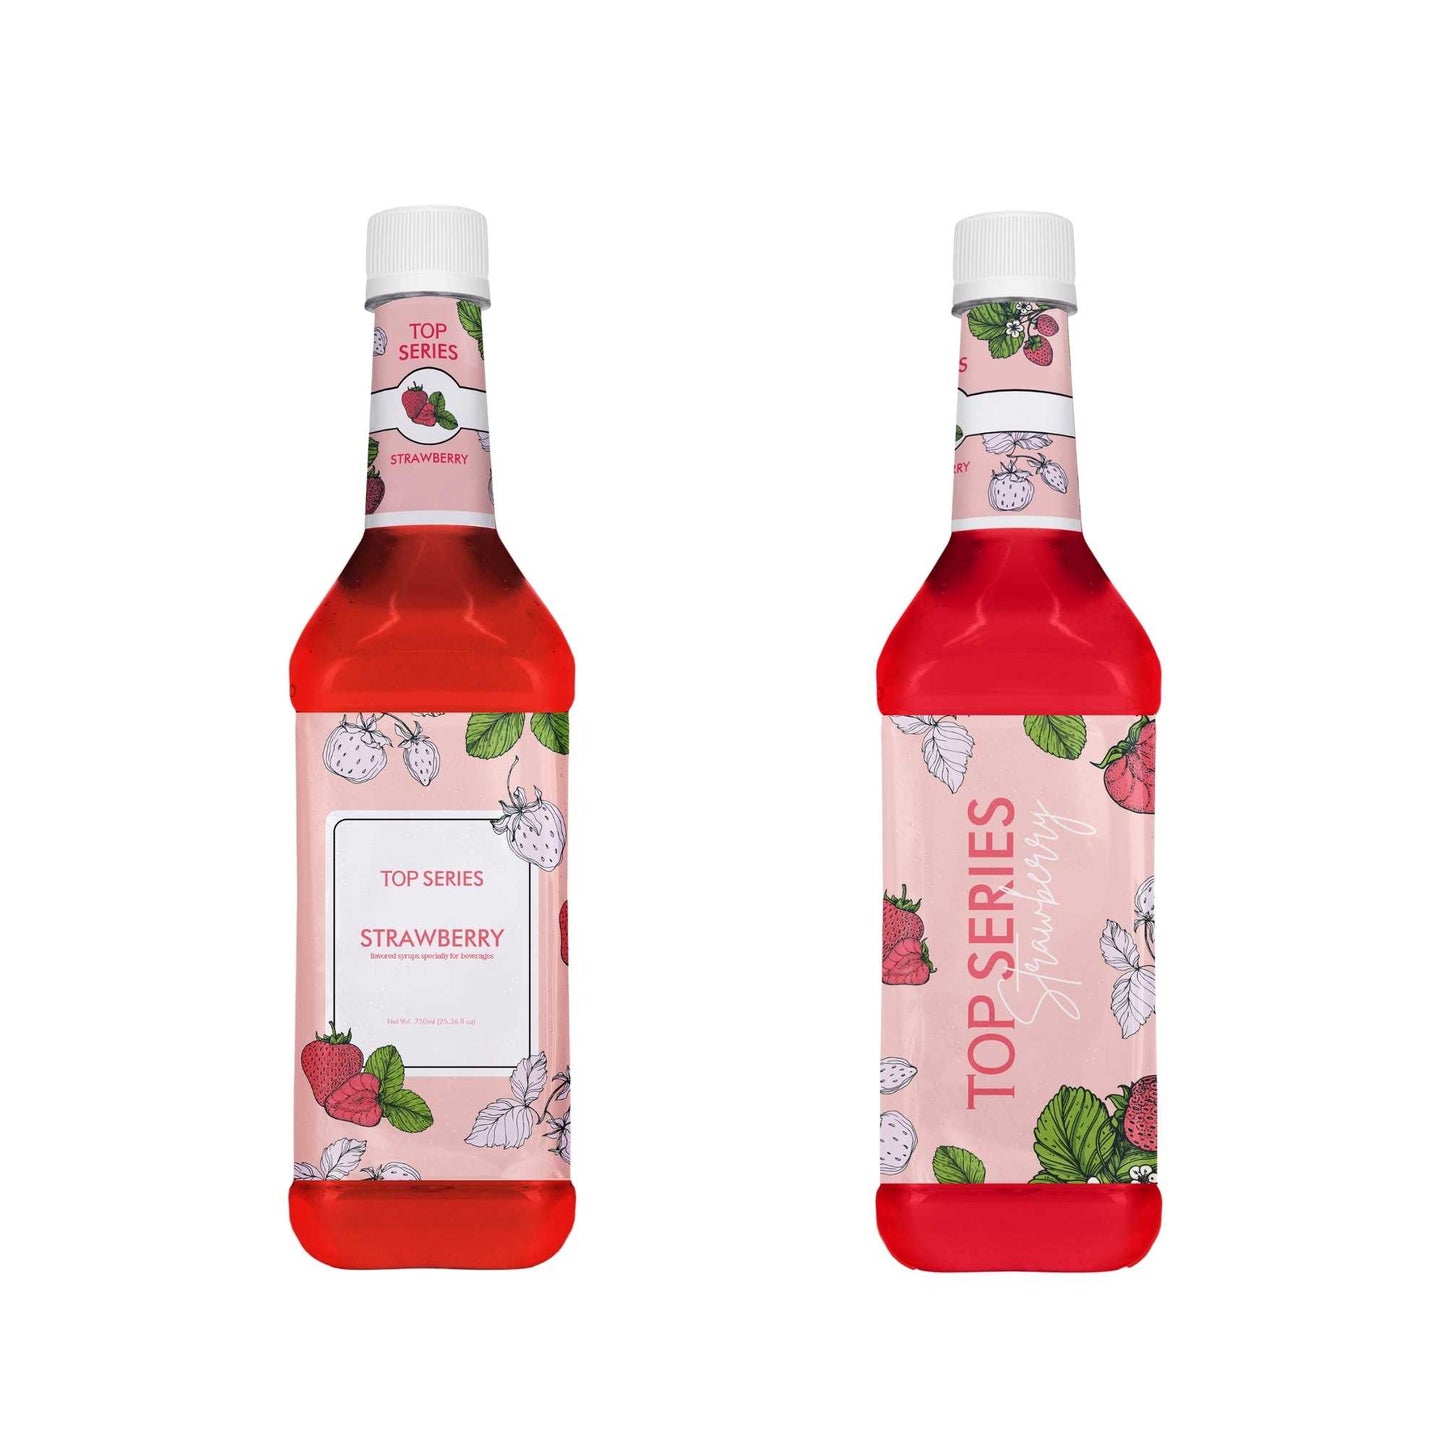 TOP Creamery Top Series Strawberry Syrup 750ml